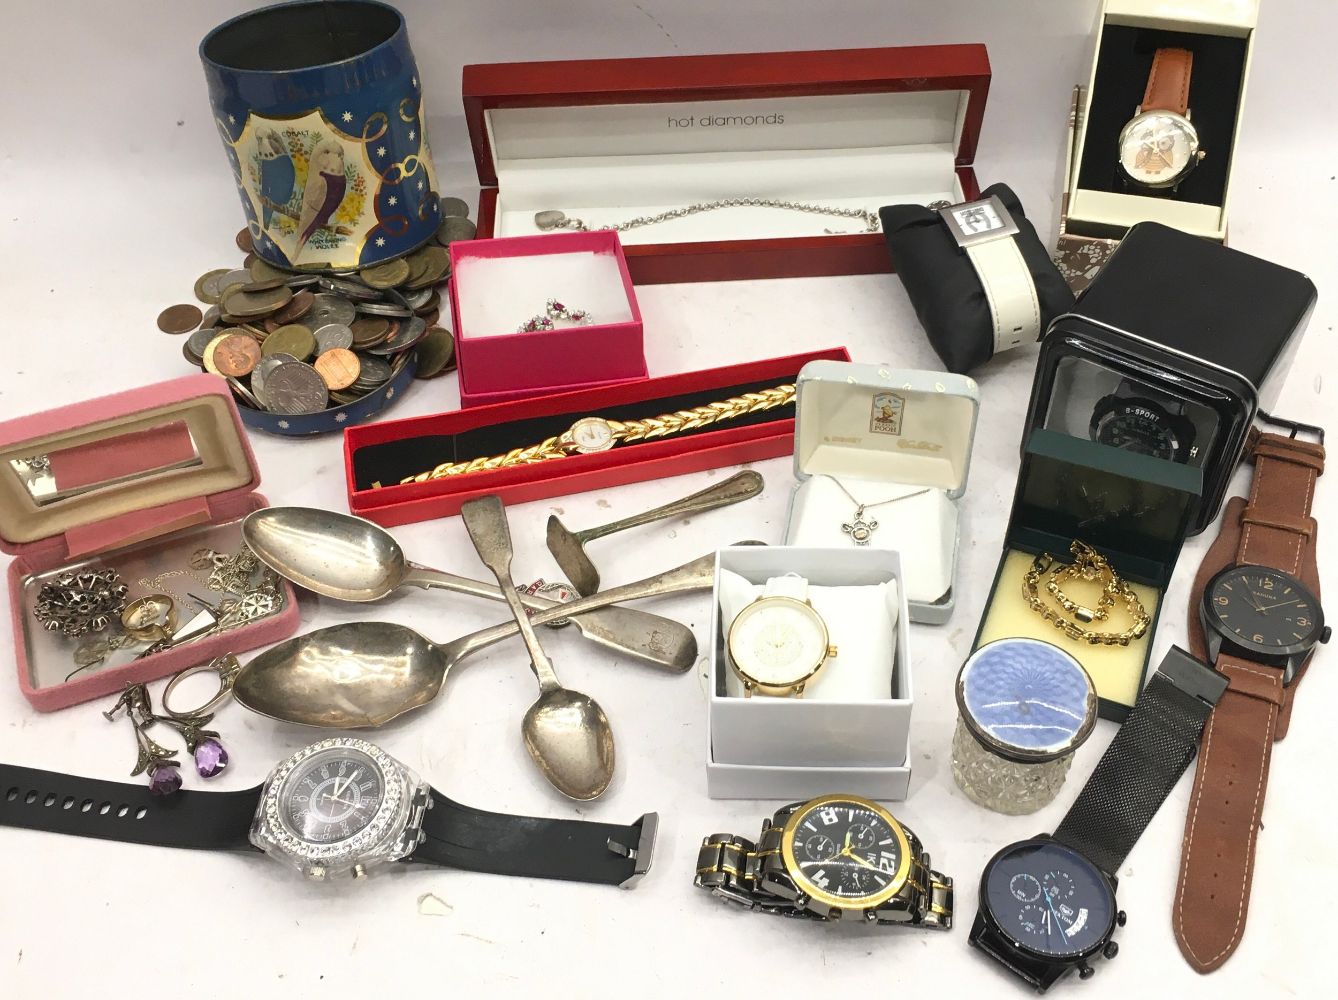 General Sale (Part 1) to include electricals, jewellery and other miscellaneous items.